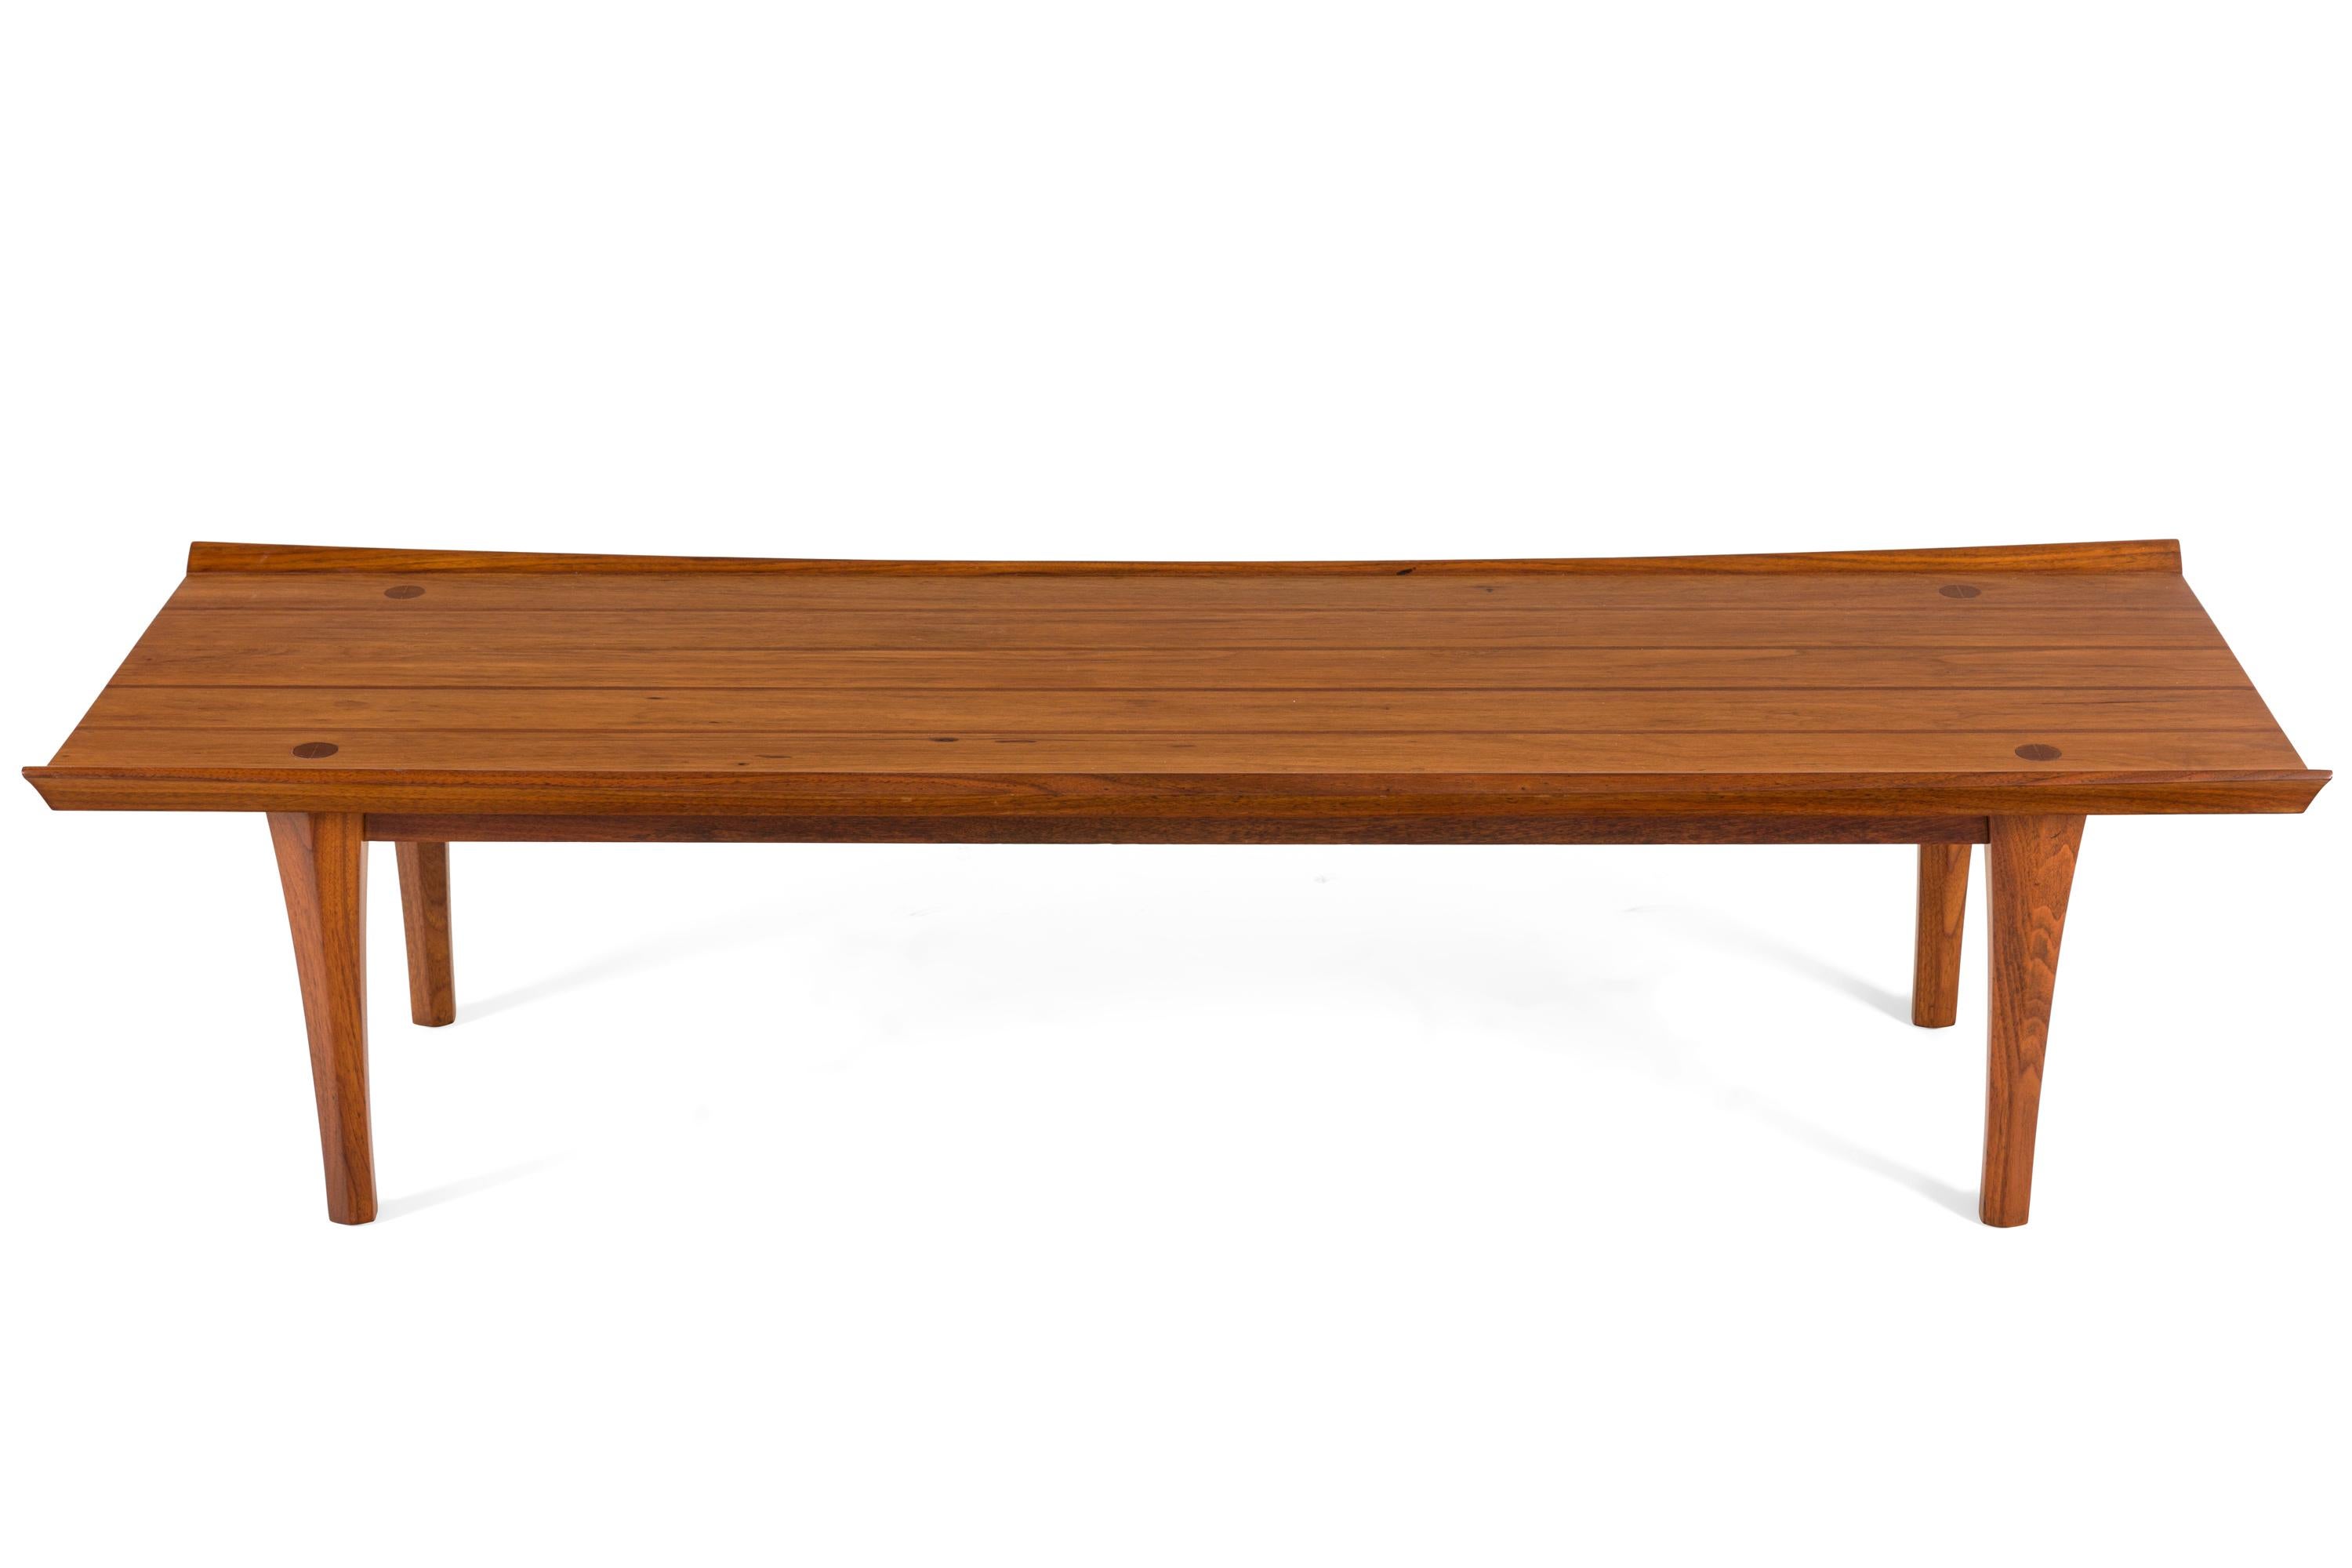 Heritage Henredon furniture made fine furniture in the mid-century style. Frank Lloyd Wright designed for the Heritage furniture line although I can't identify the designer of this table.